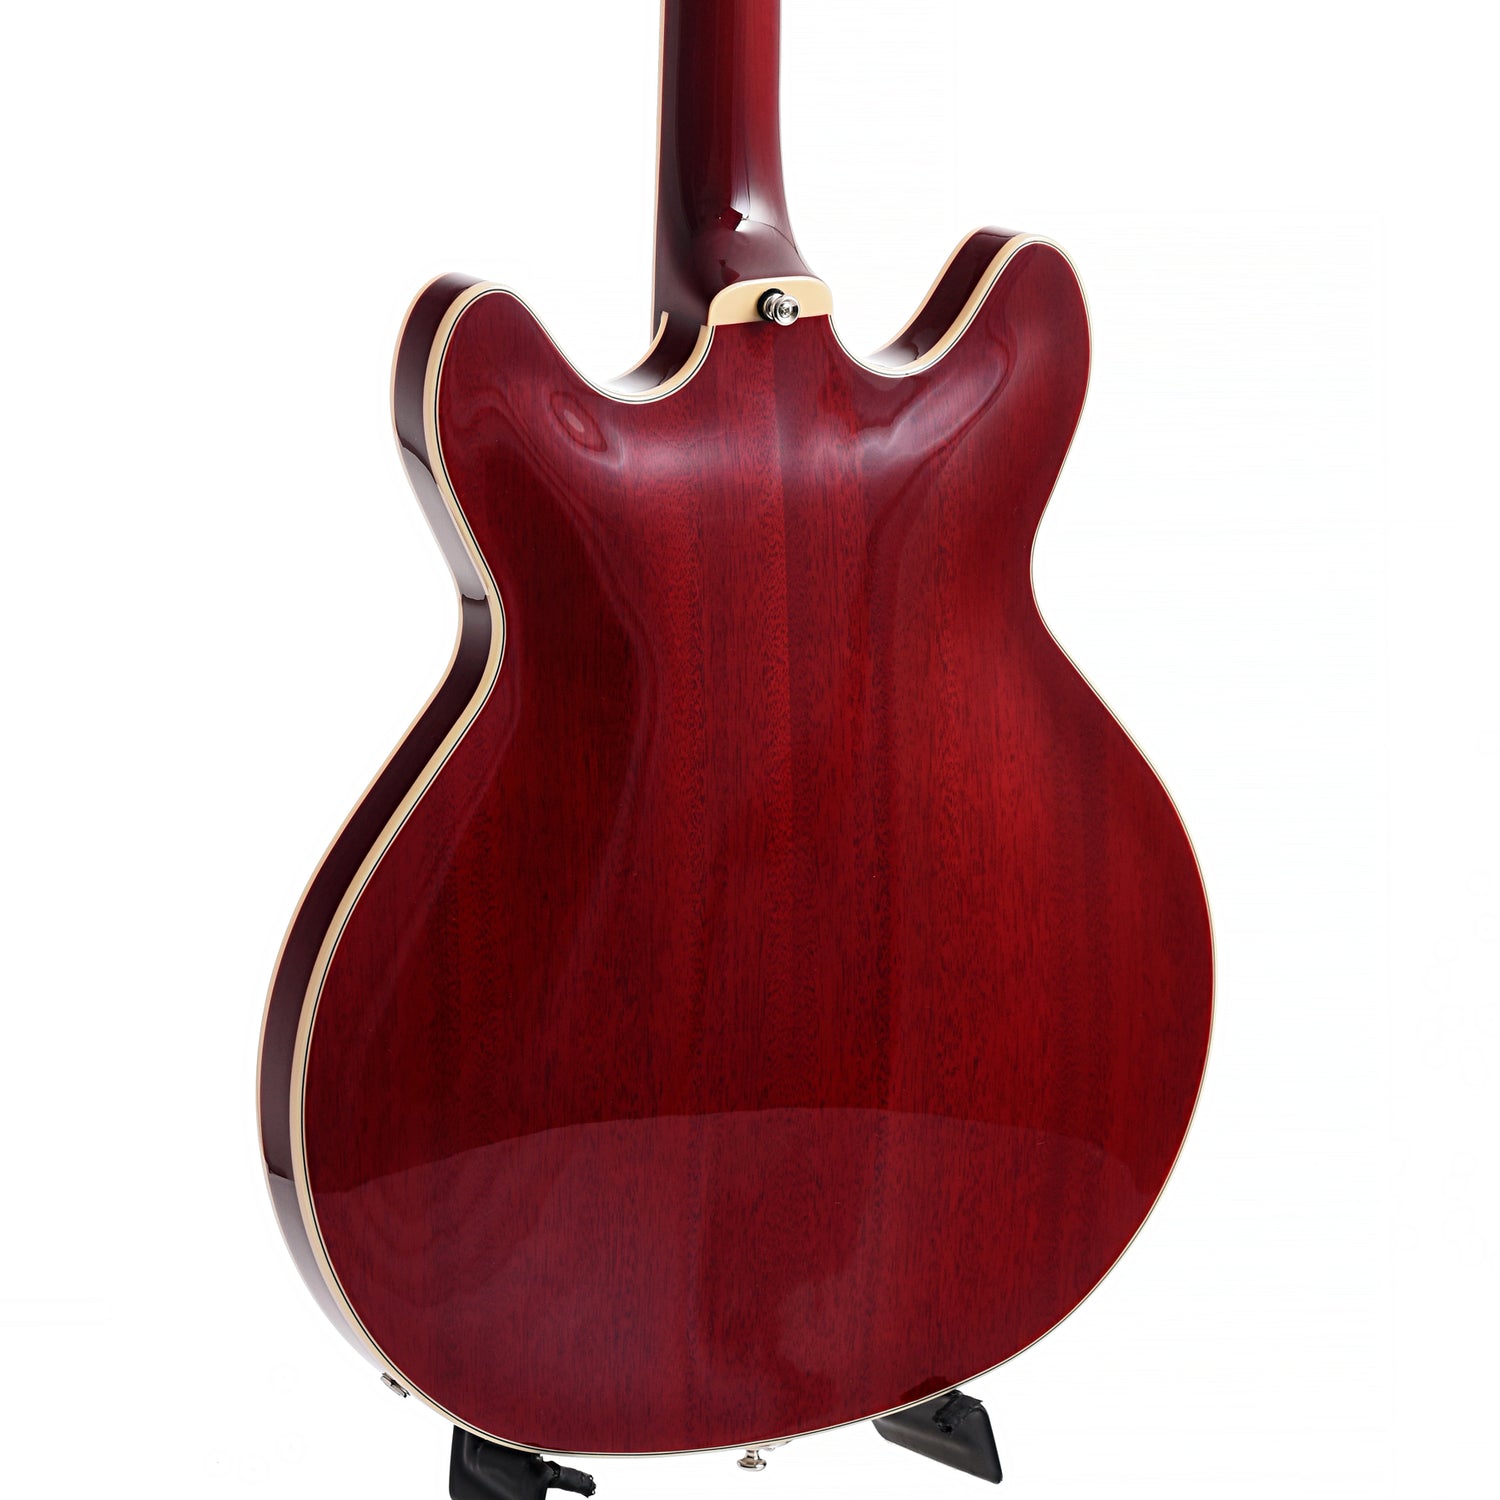 Image 9 of Guild Starfire 1 Bass, Cherry Red - SKU# GSF1BASS-CHR : Product Type Hollow Body Bass Guitars : Elderly Instruments